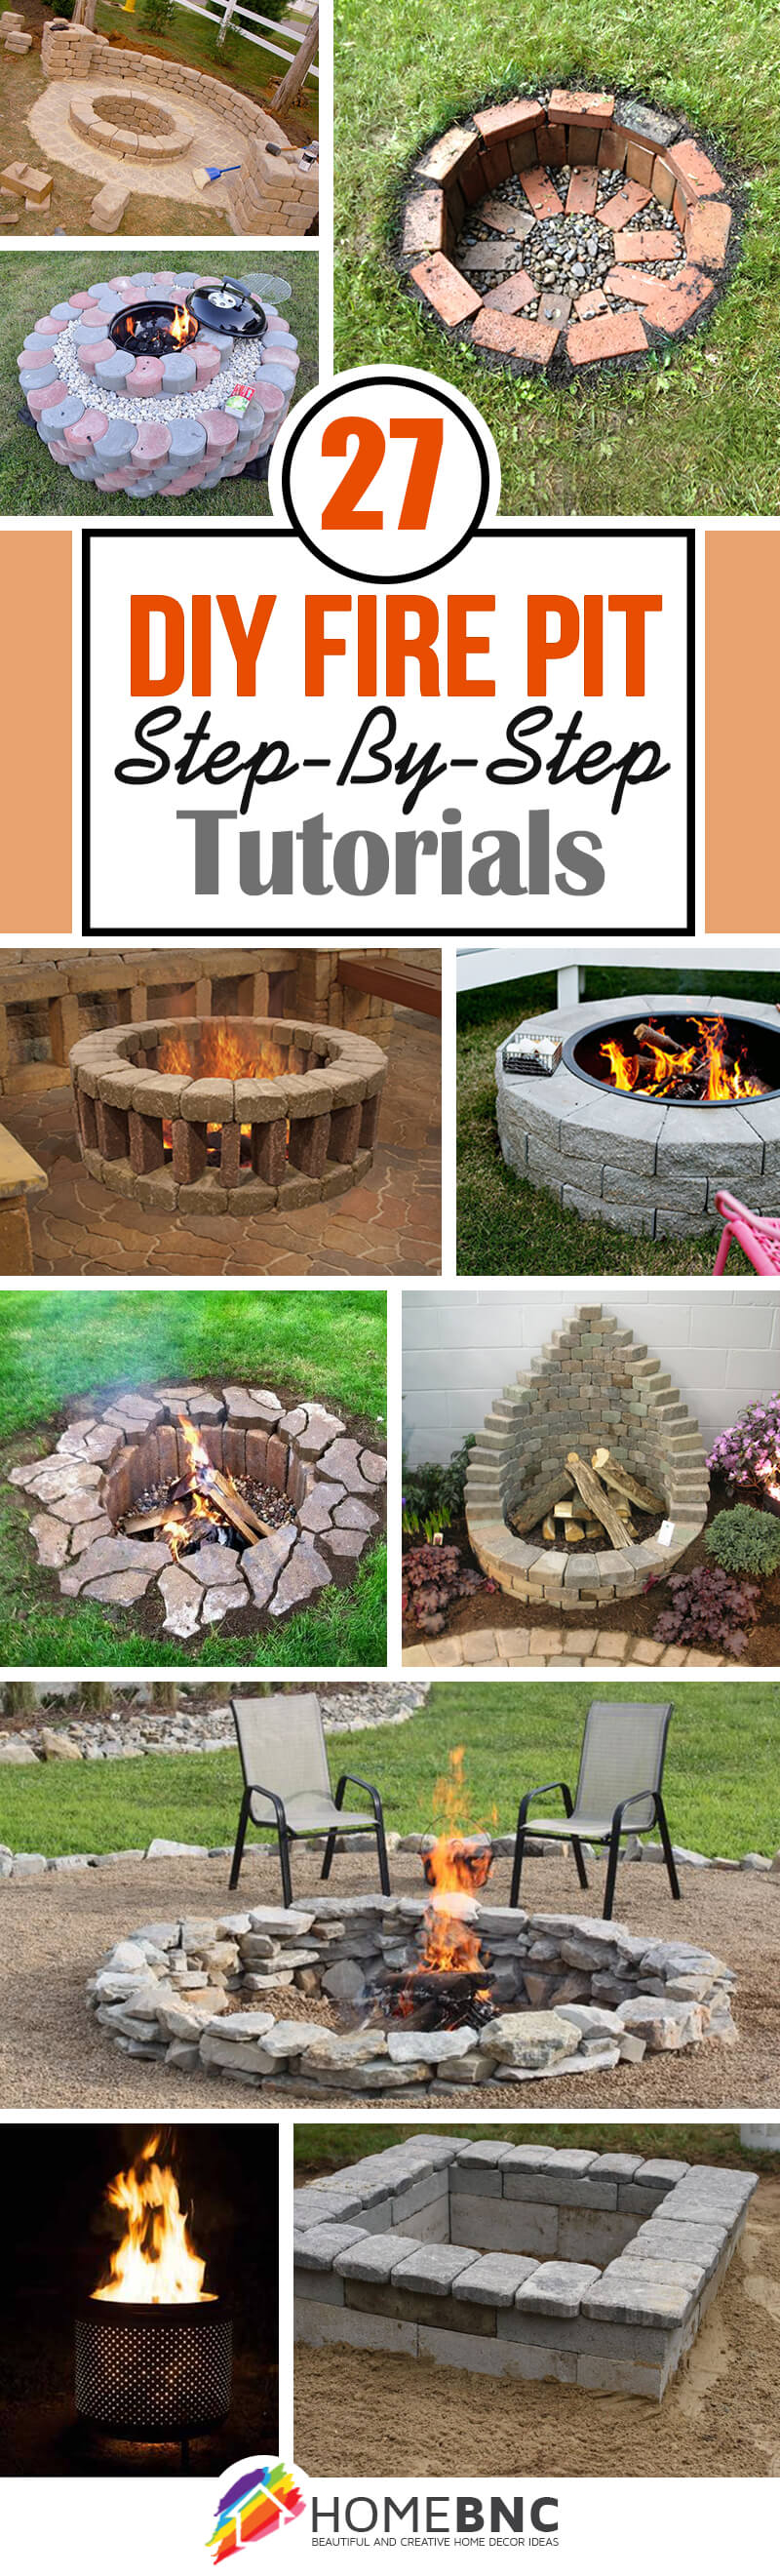 27 Best Diy Firepit Ideas And Designs, How To Make A Simple Fire Pit In Your Backyard